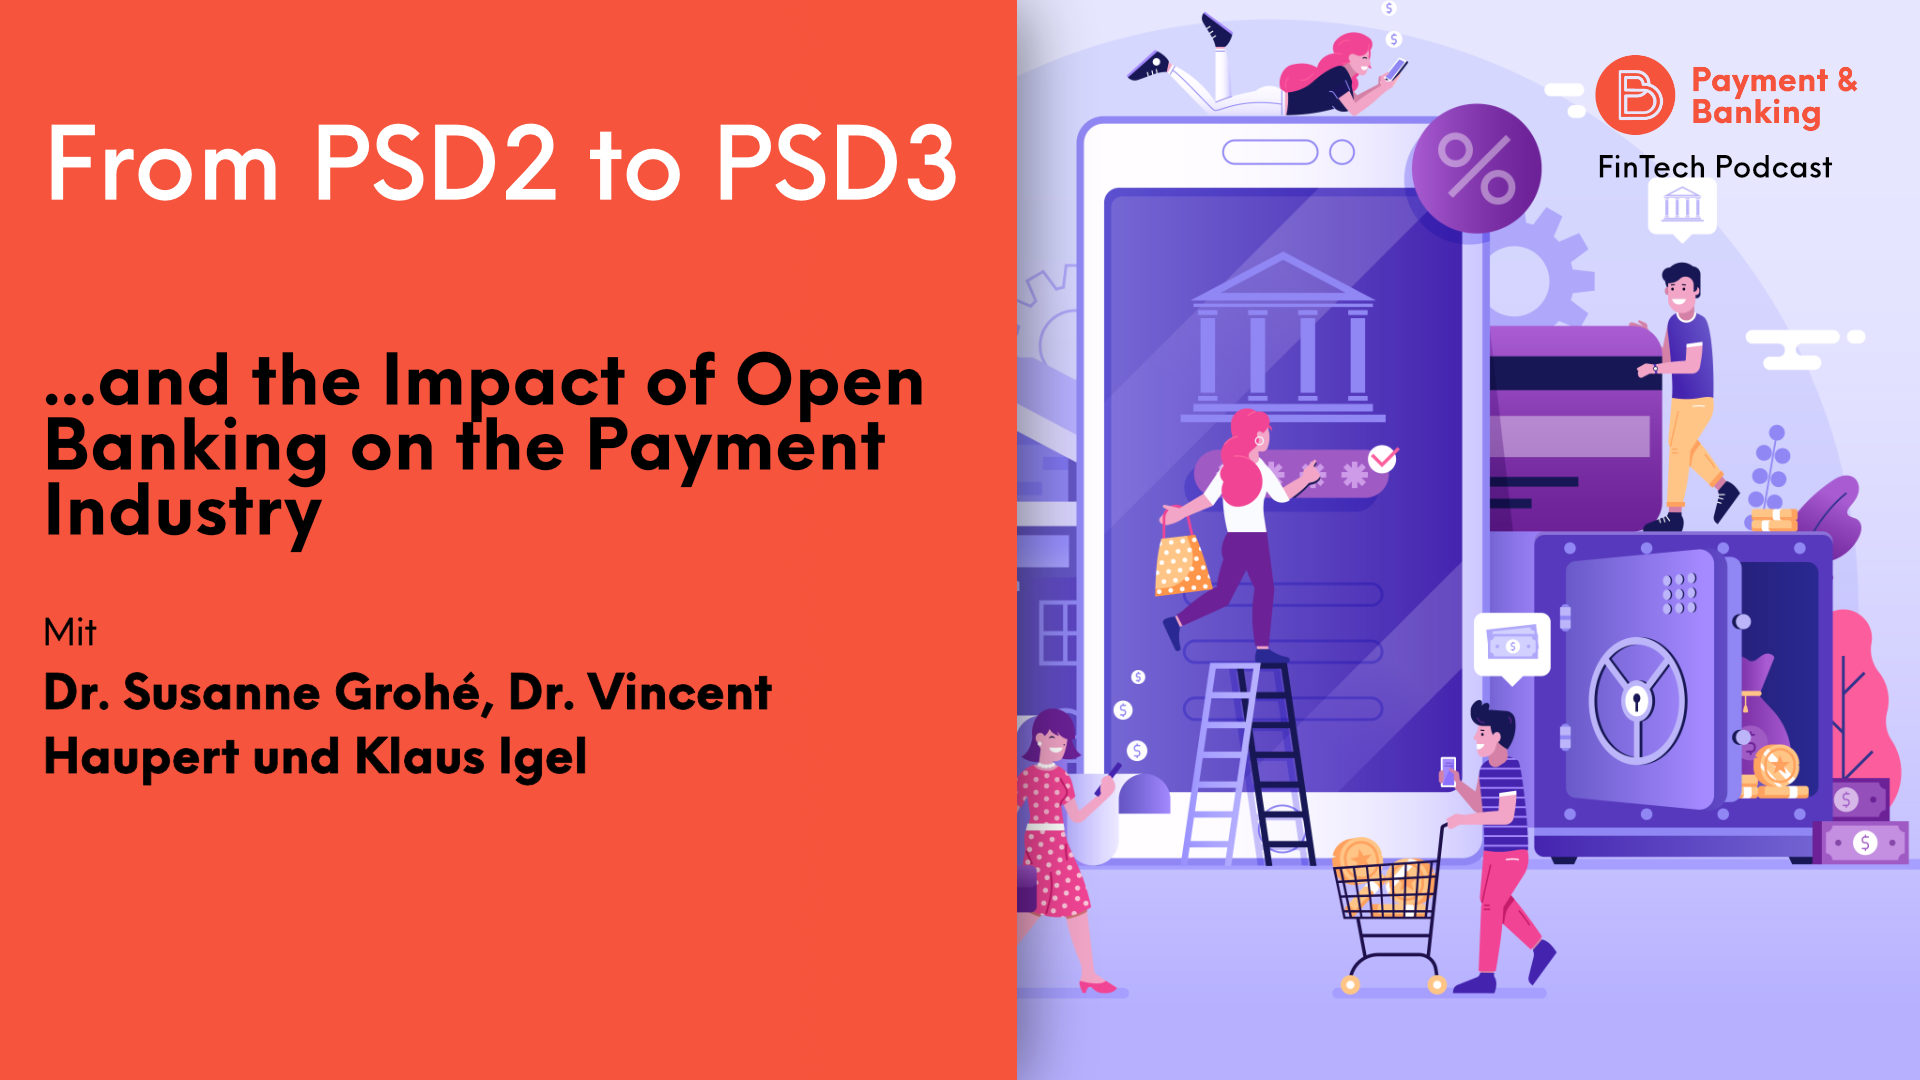 From PSD2 to PSD3 and the Impact of Open Banking on Payment Industry